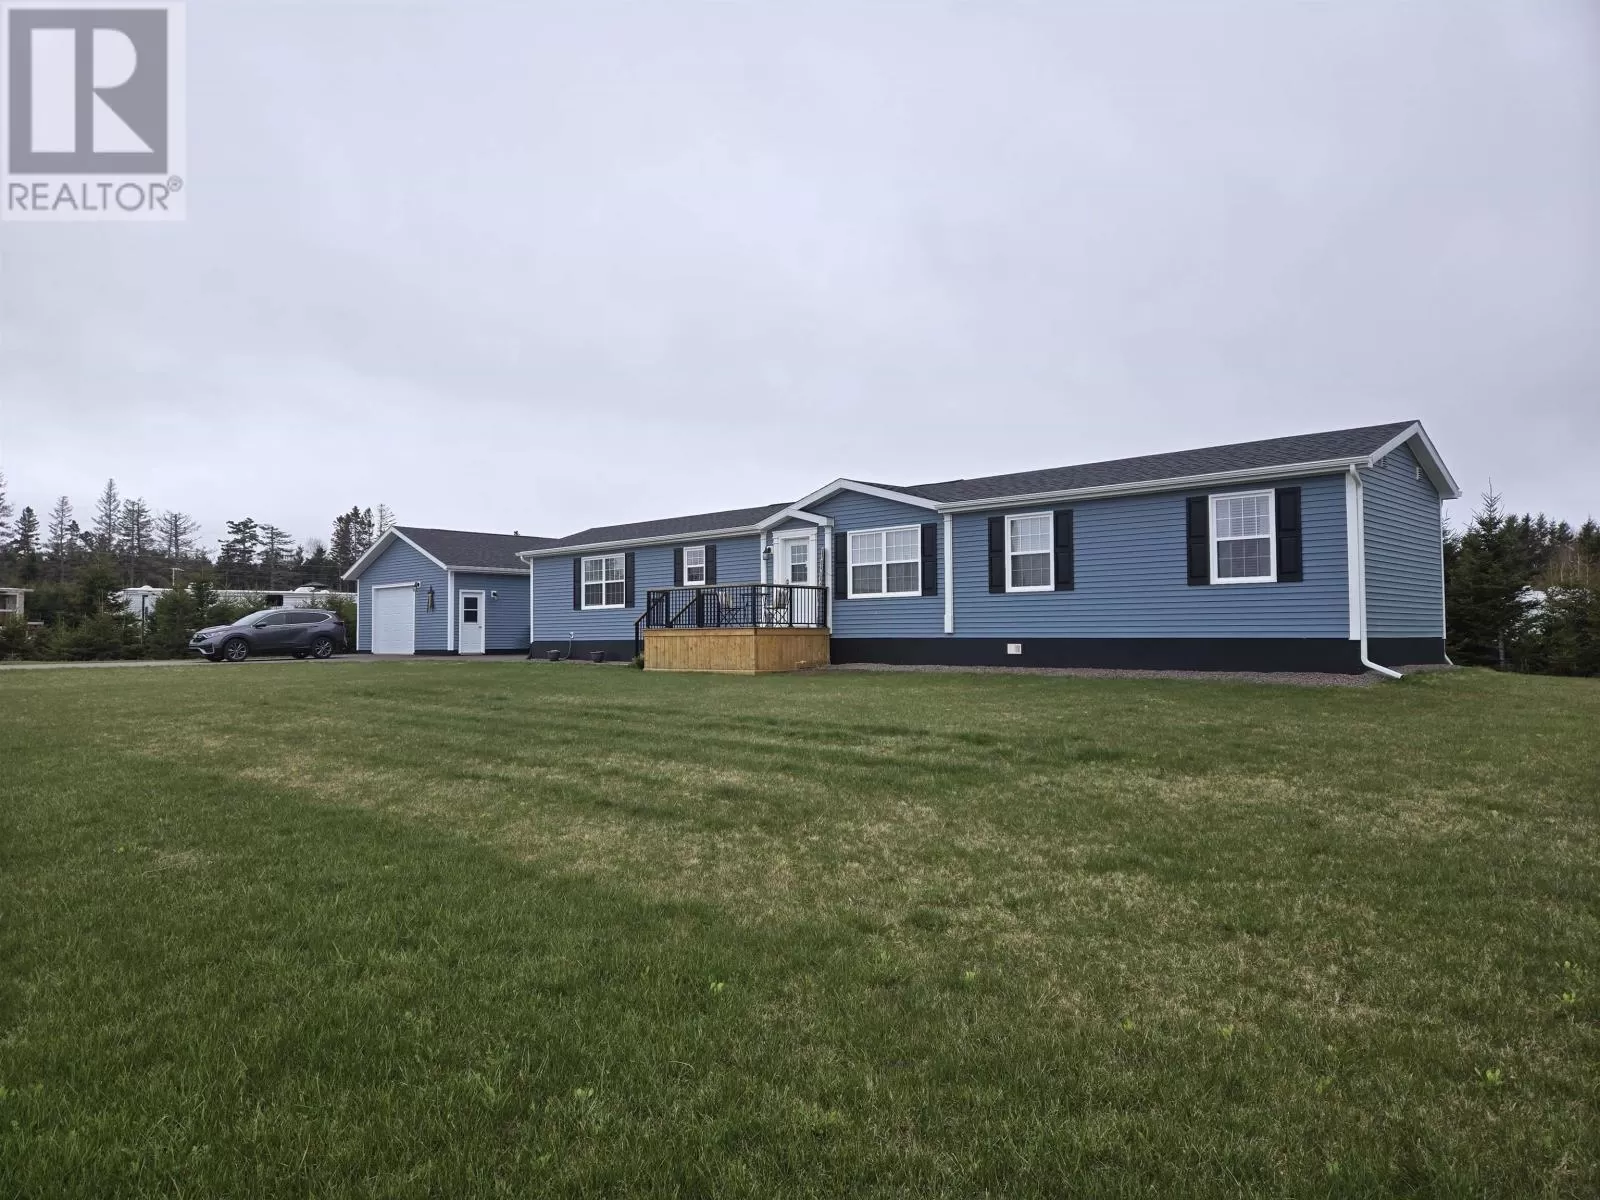 Mobile Home for rent: 179 Ferry Road, Cascumpec, Prince Edward Island C0B 1B0